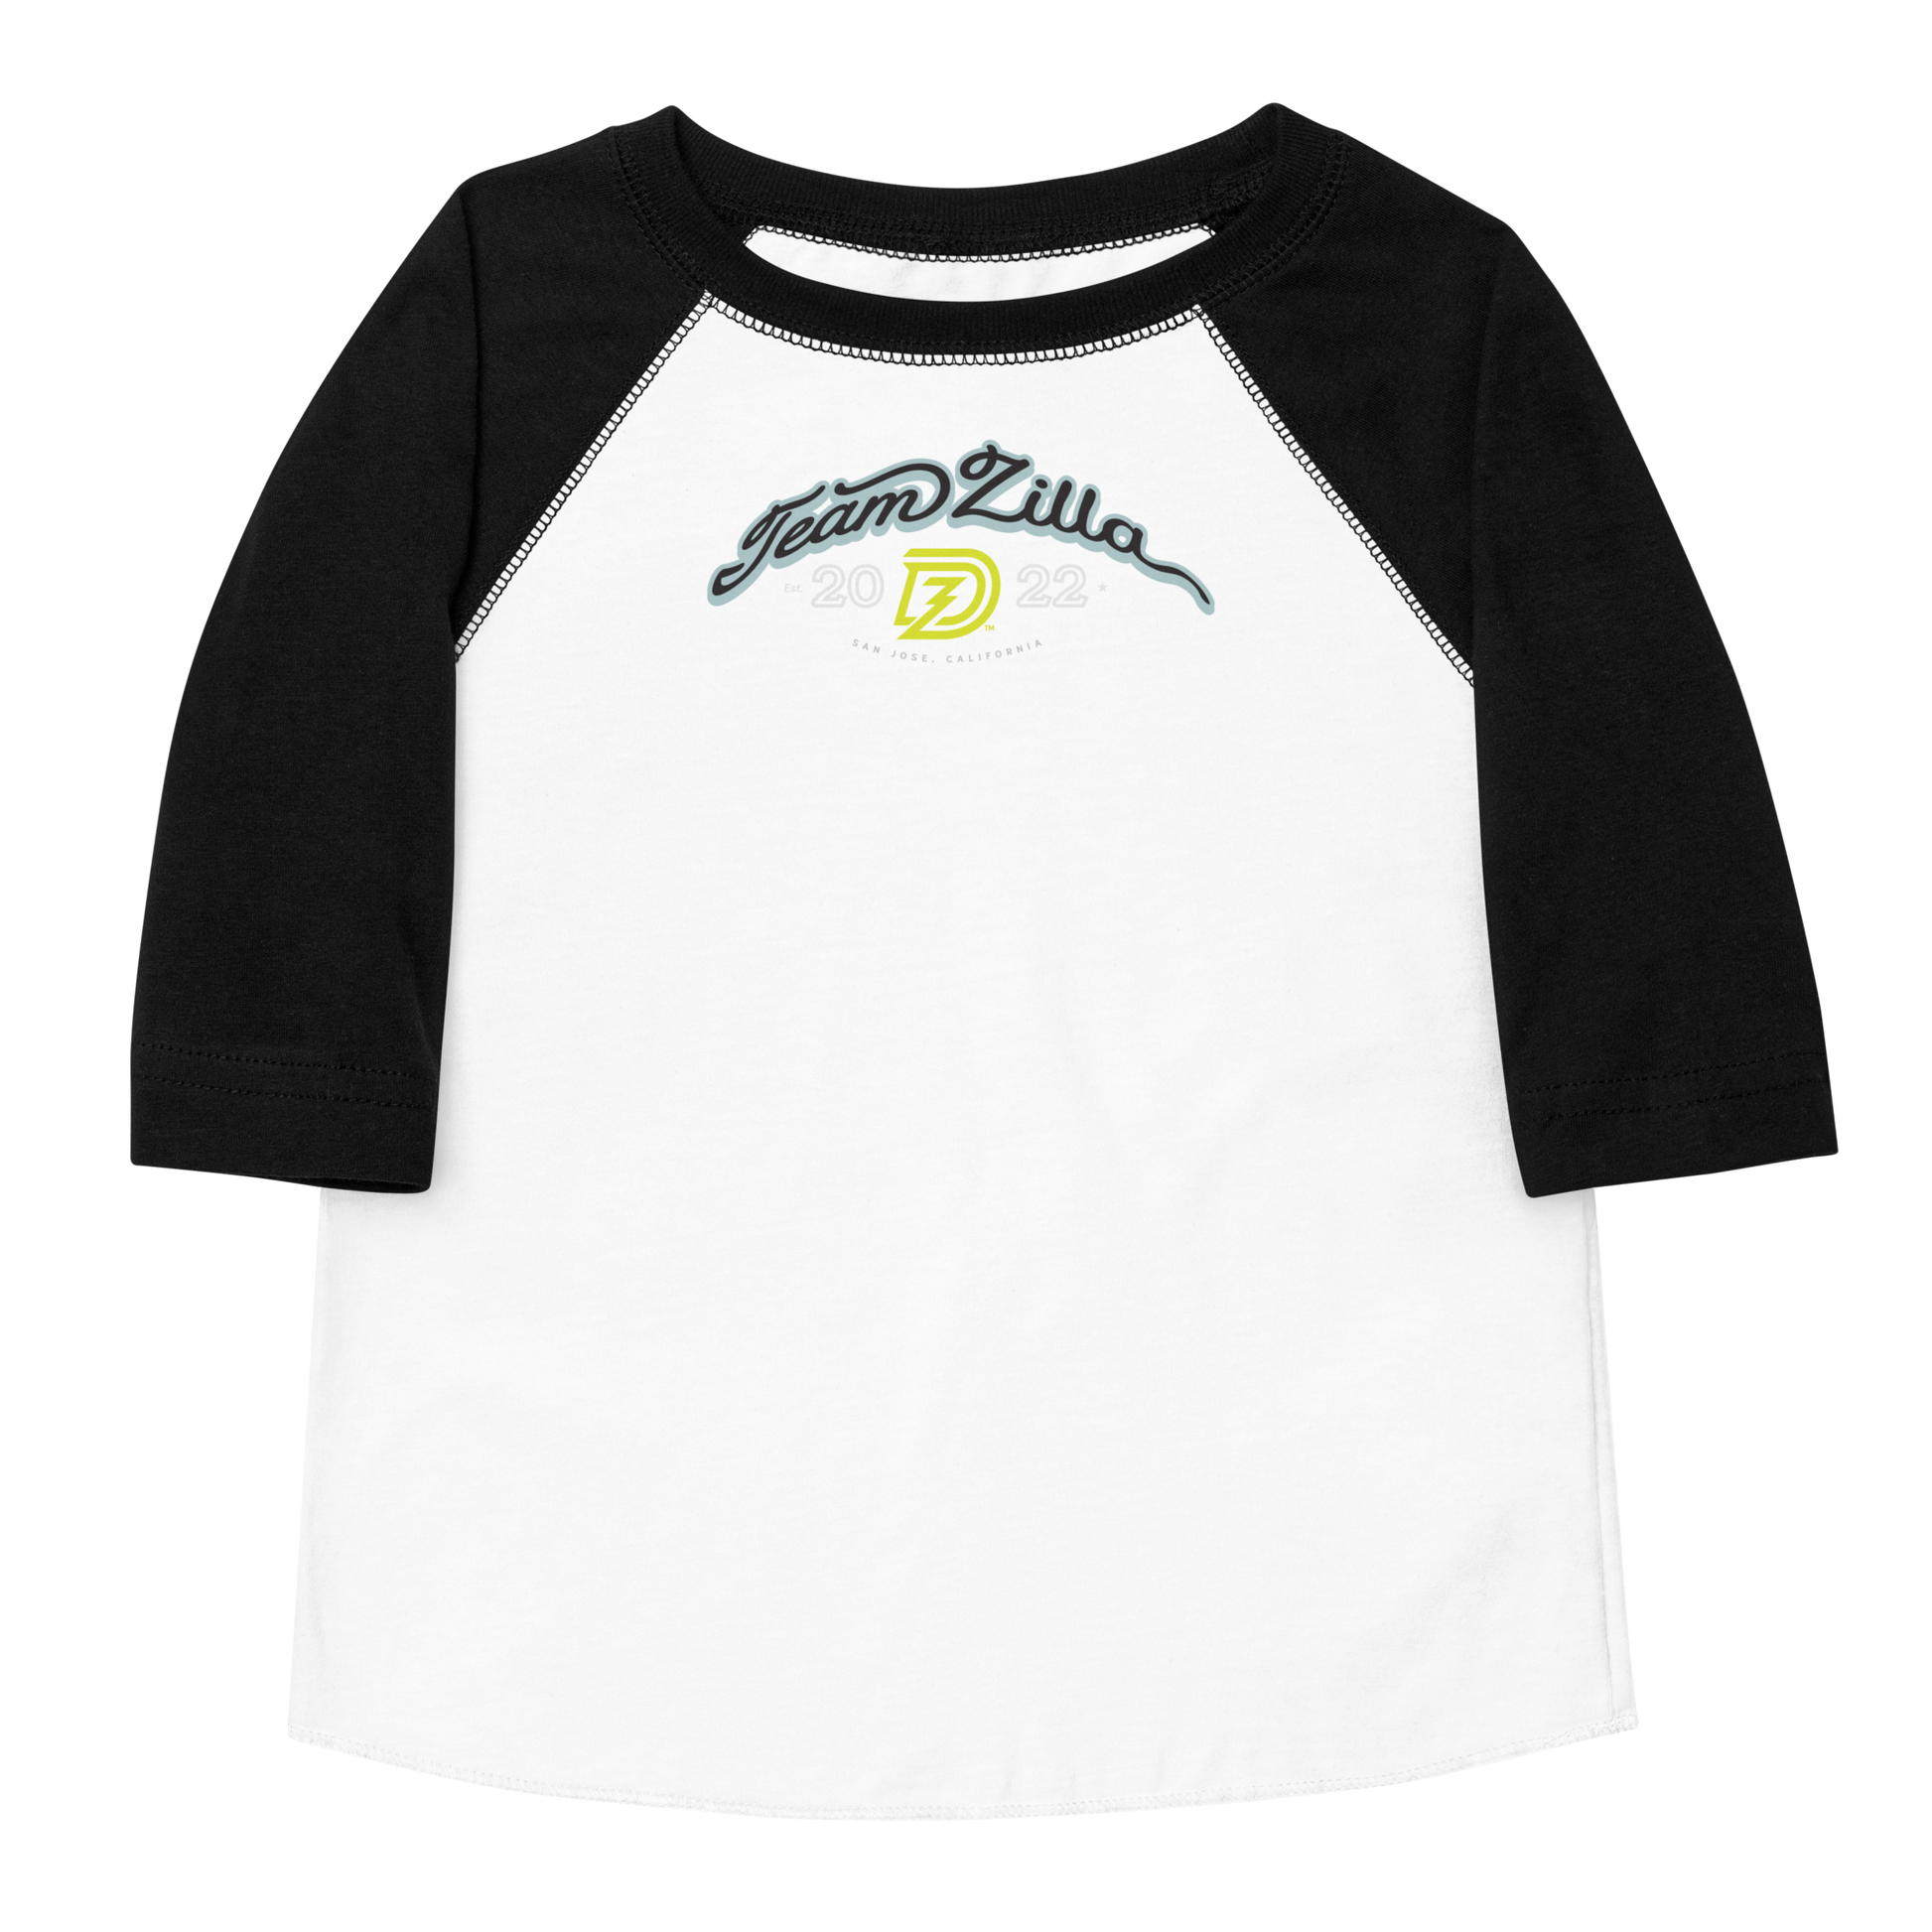 Team Zilla 2022 Toddler Shirt in White with Black Sleeves